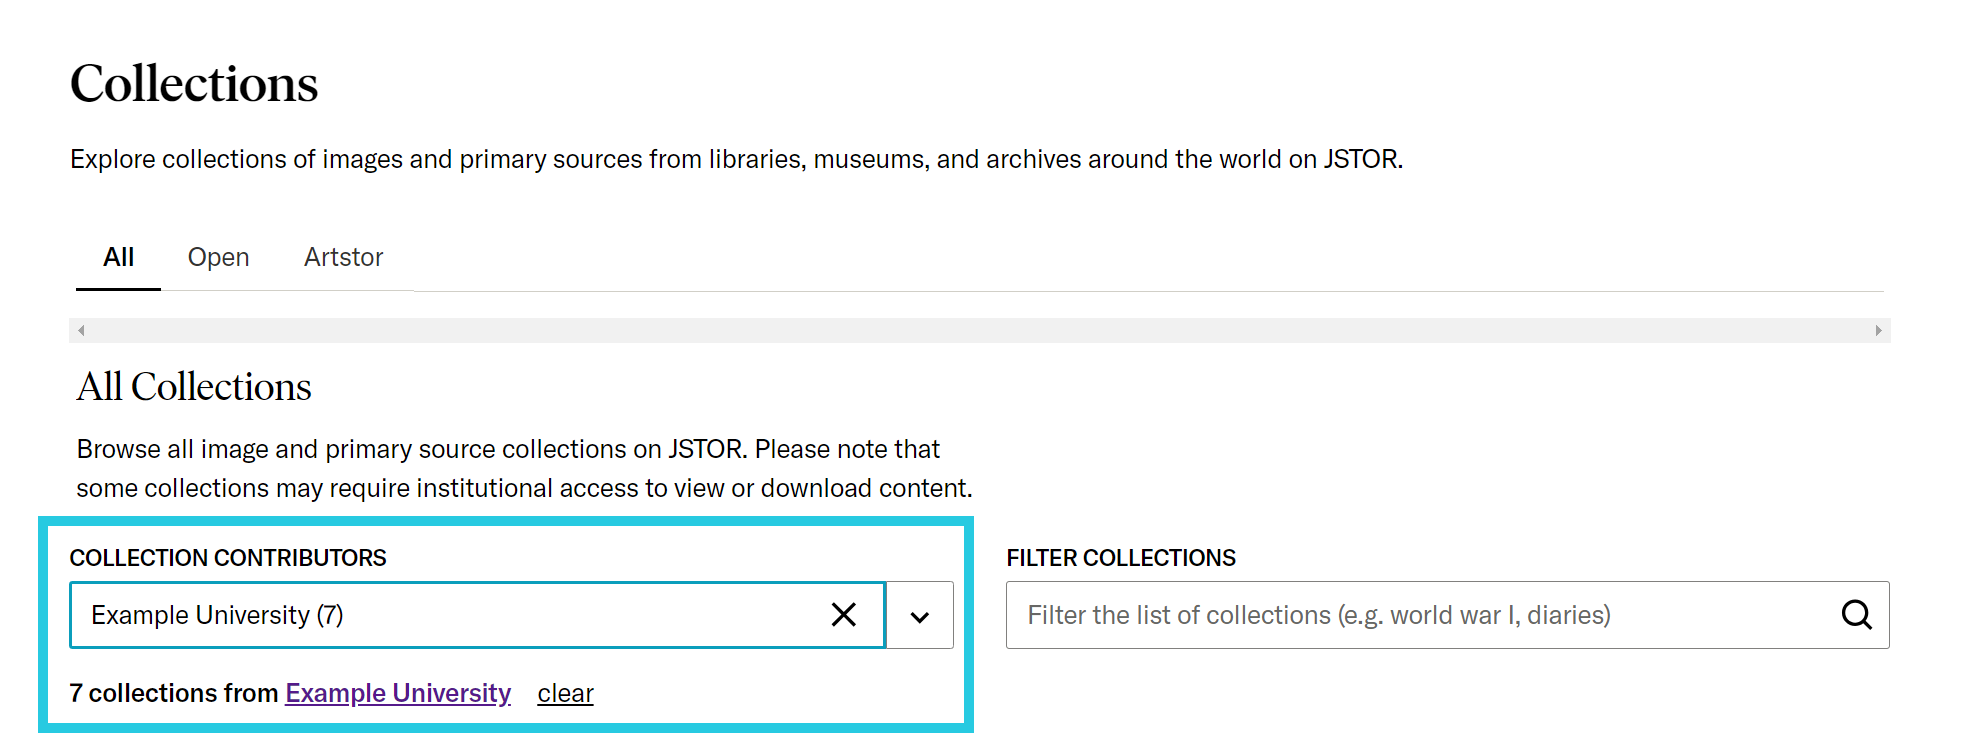 Viewing collections from the a specific collection contributor